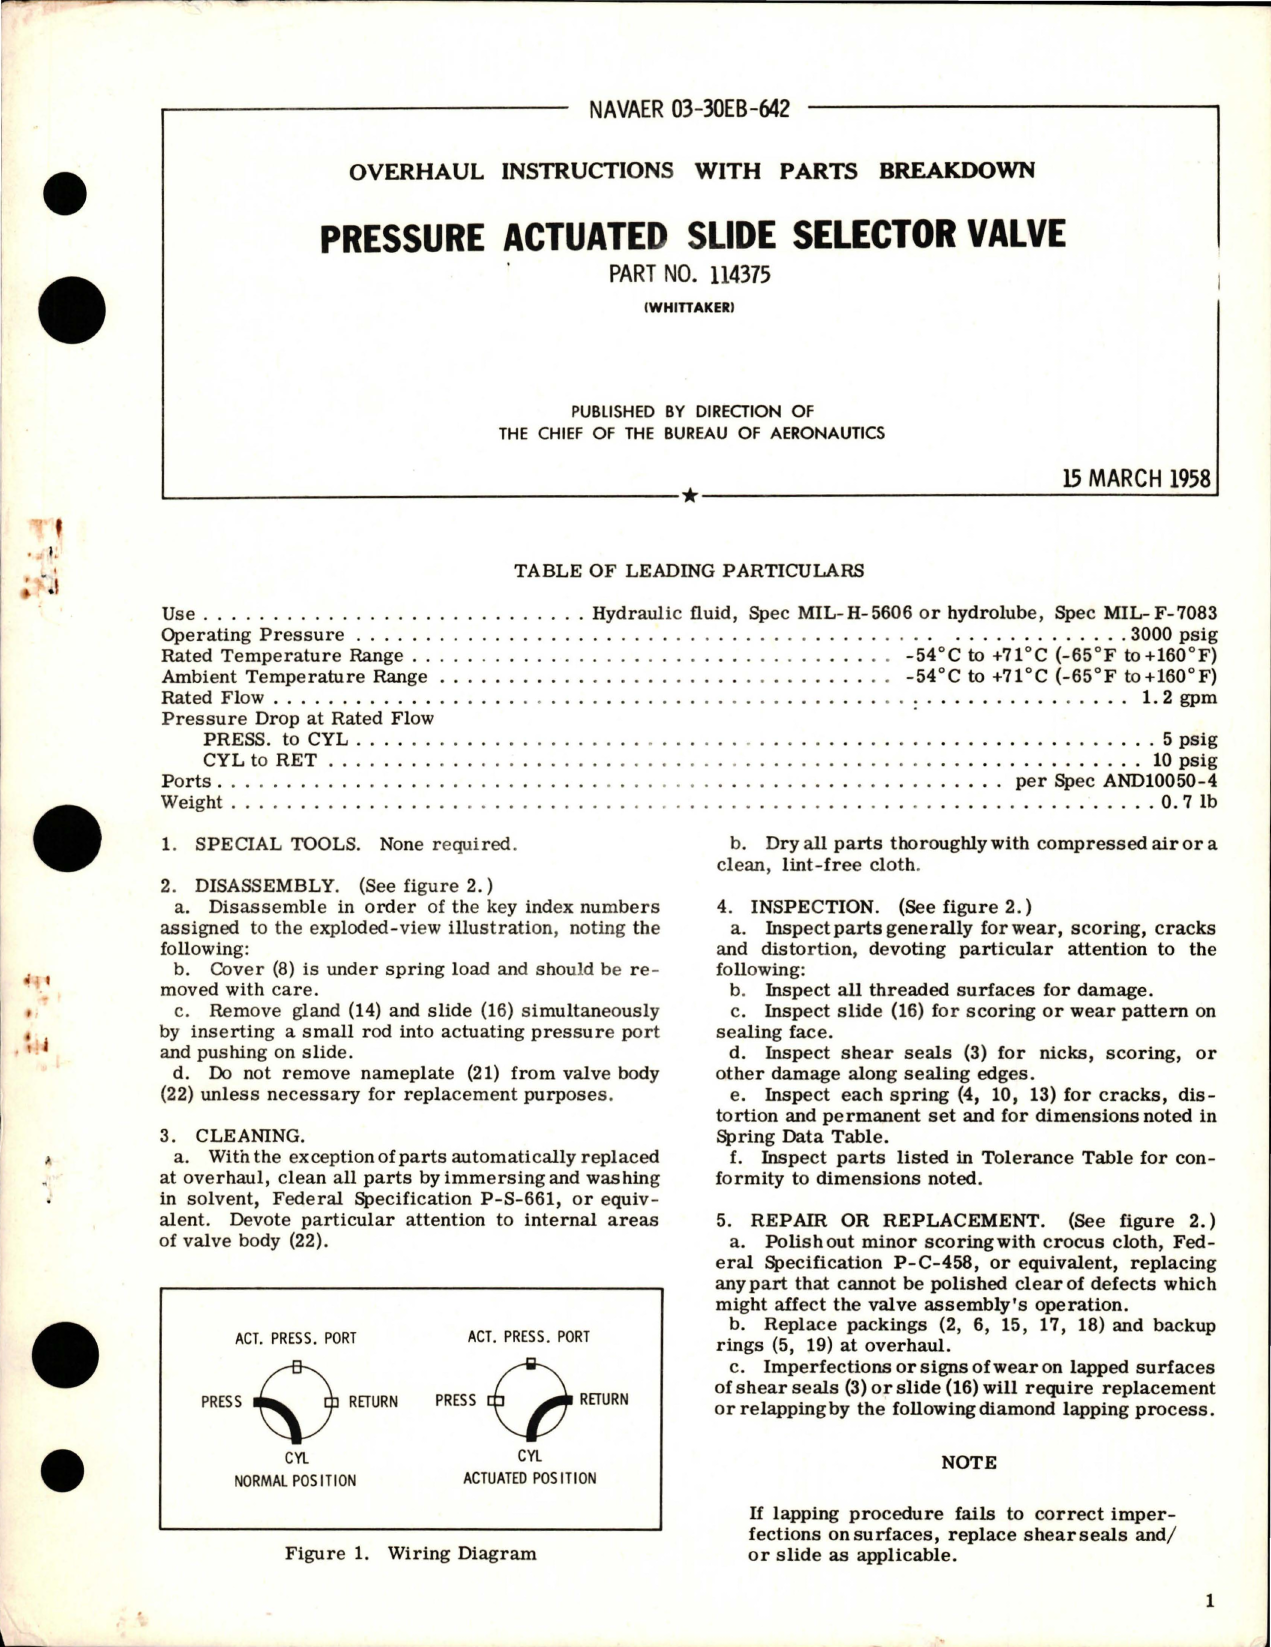 Sample page 1 from AirCorps Library document: Overhaul Instructions with Parts for Pressure Actuated Slide Selector Valve - Part 114375